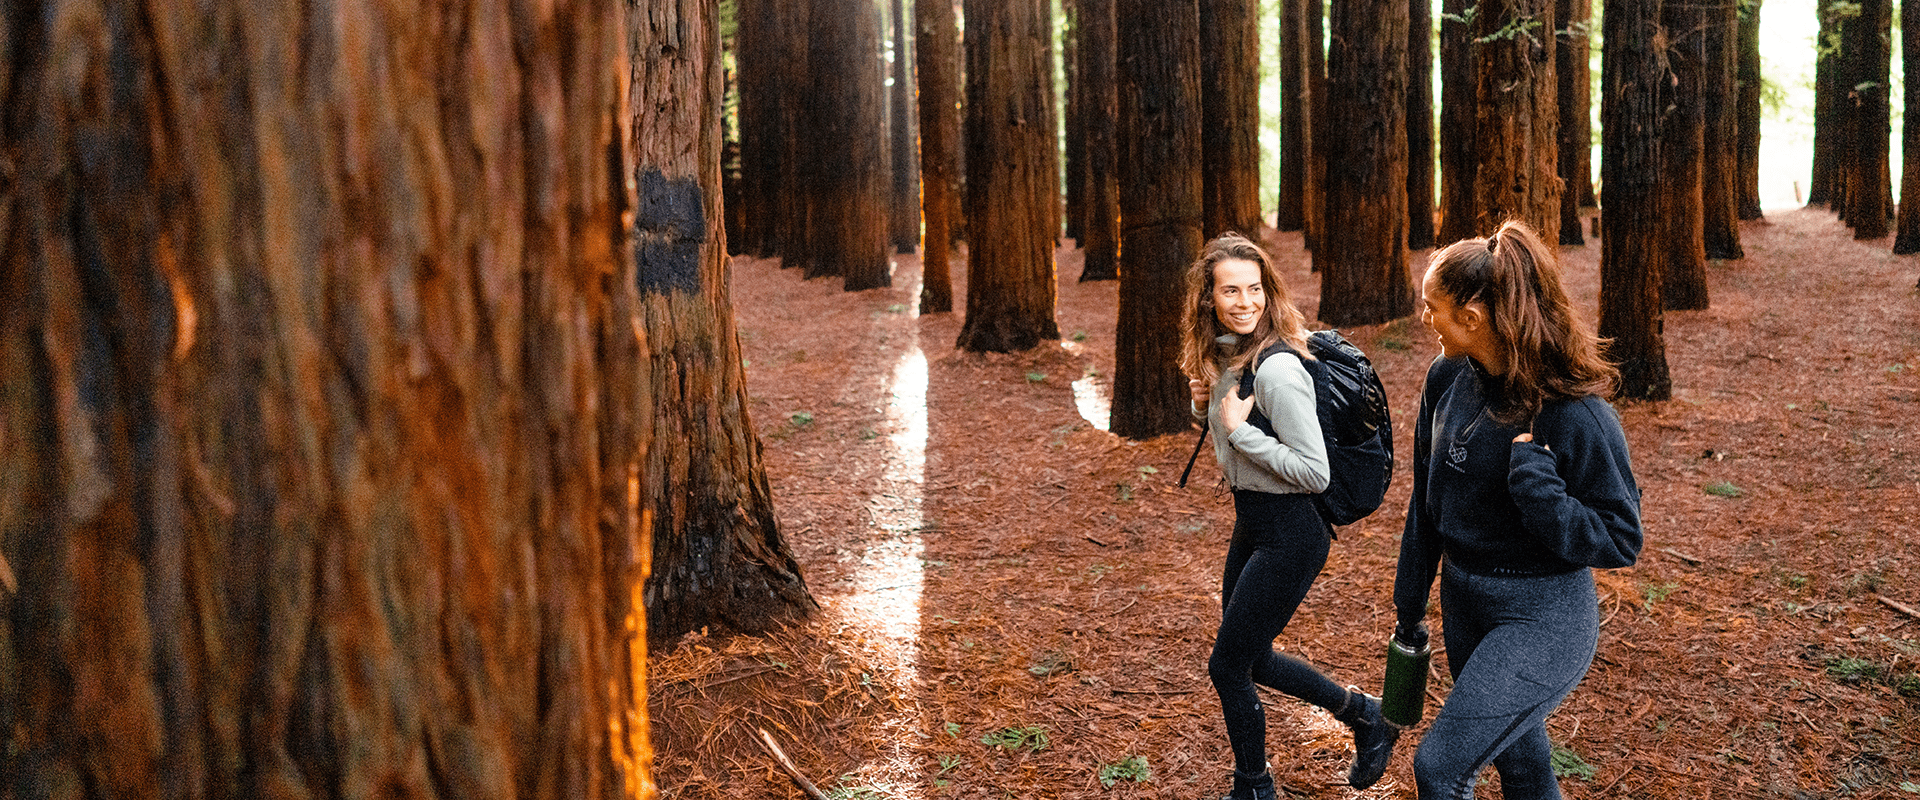 Two females carrying hiking packs walk amongst the towering Redwoods as the sun filters through the canopy.